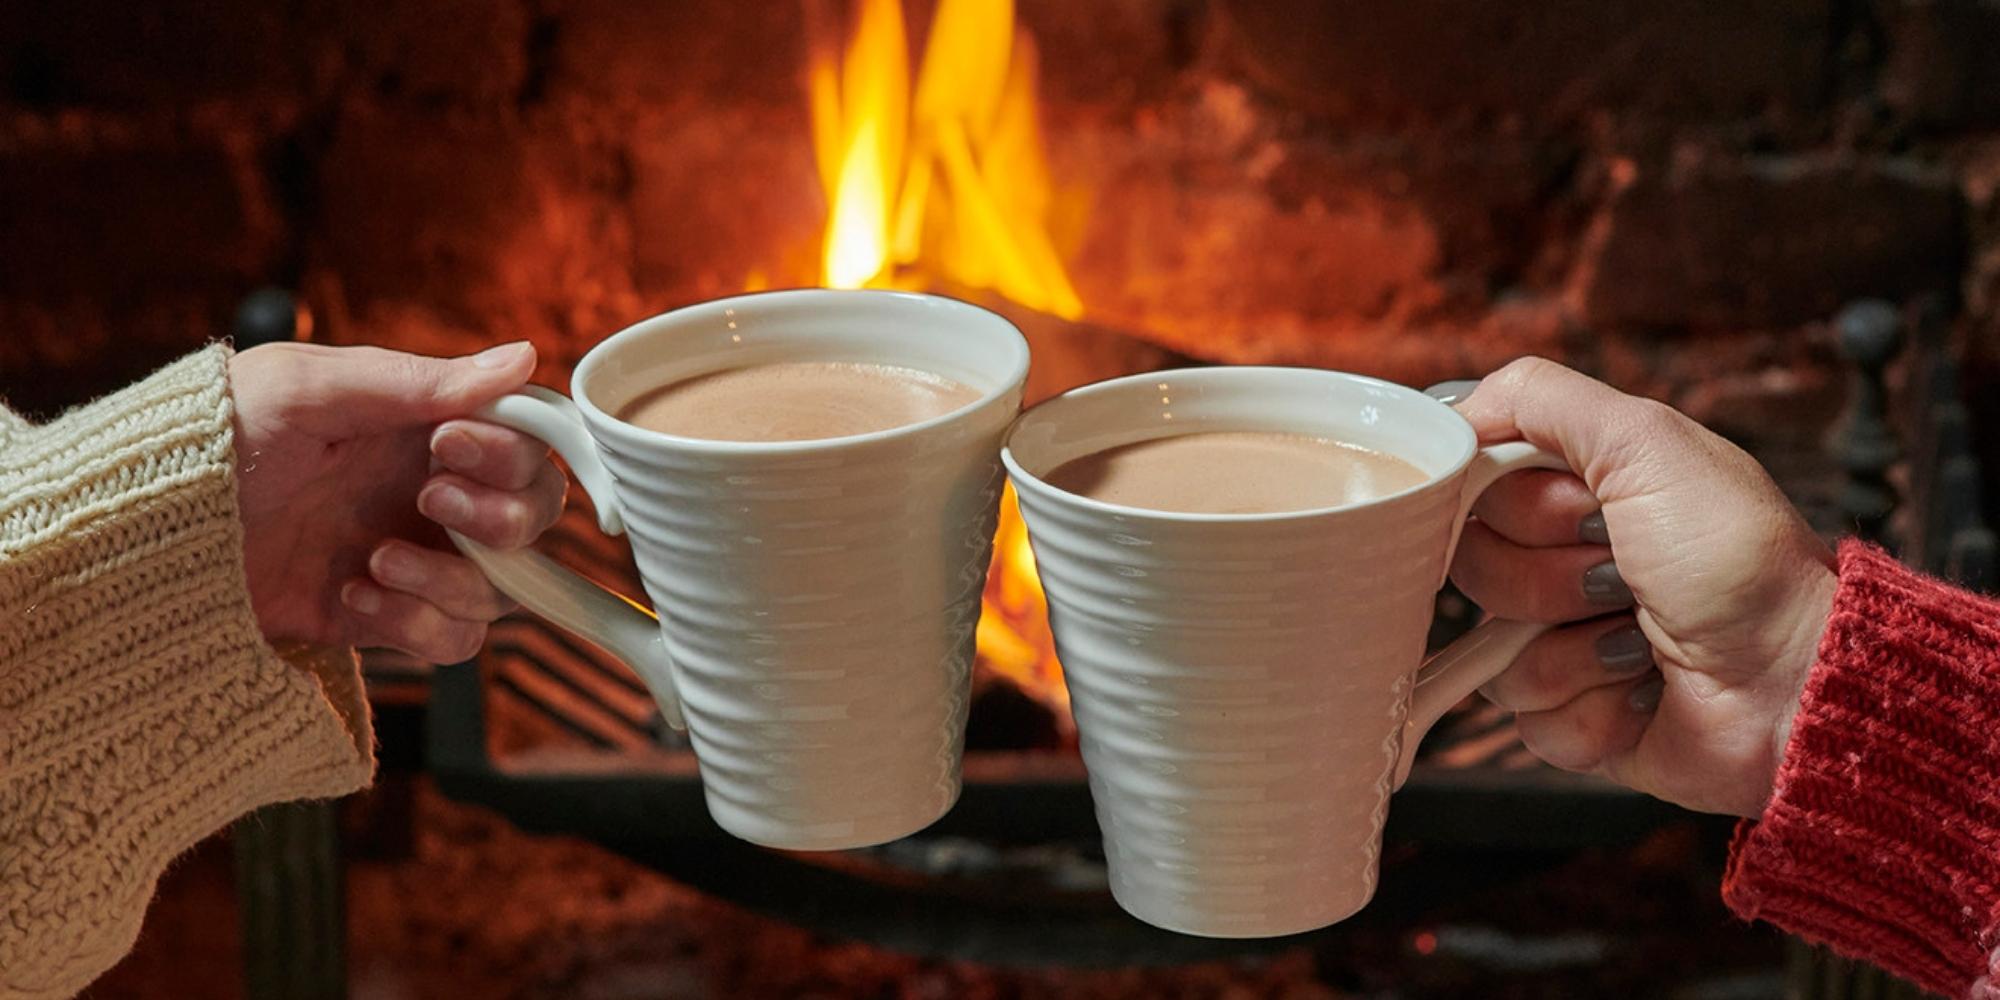 Hot chocolates by a fireplace